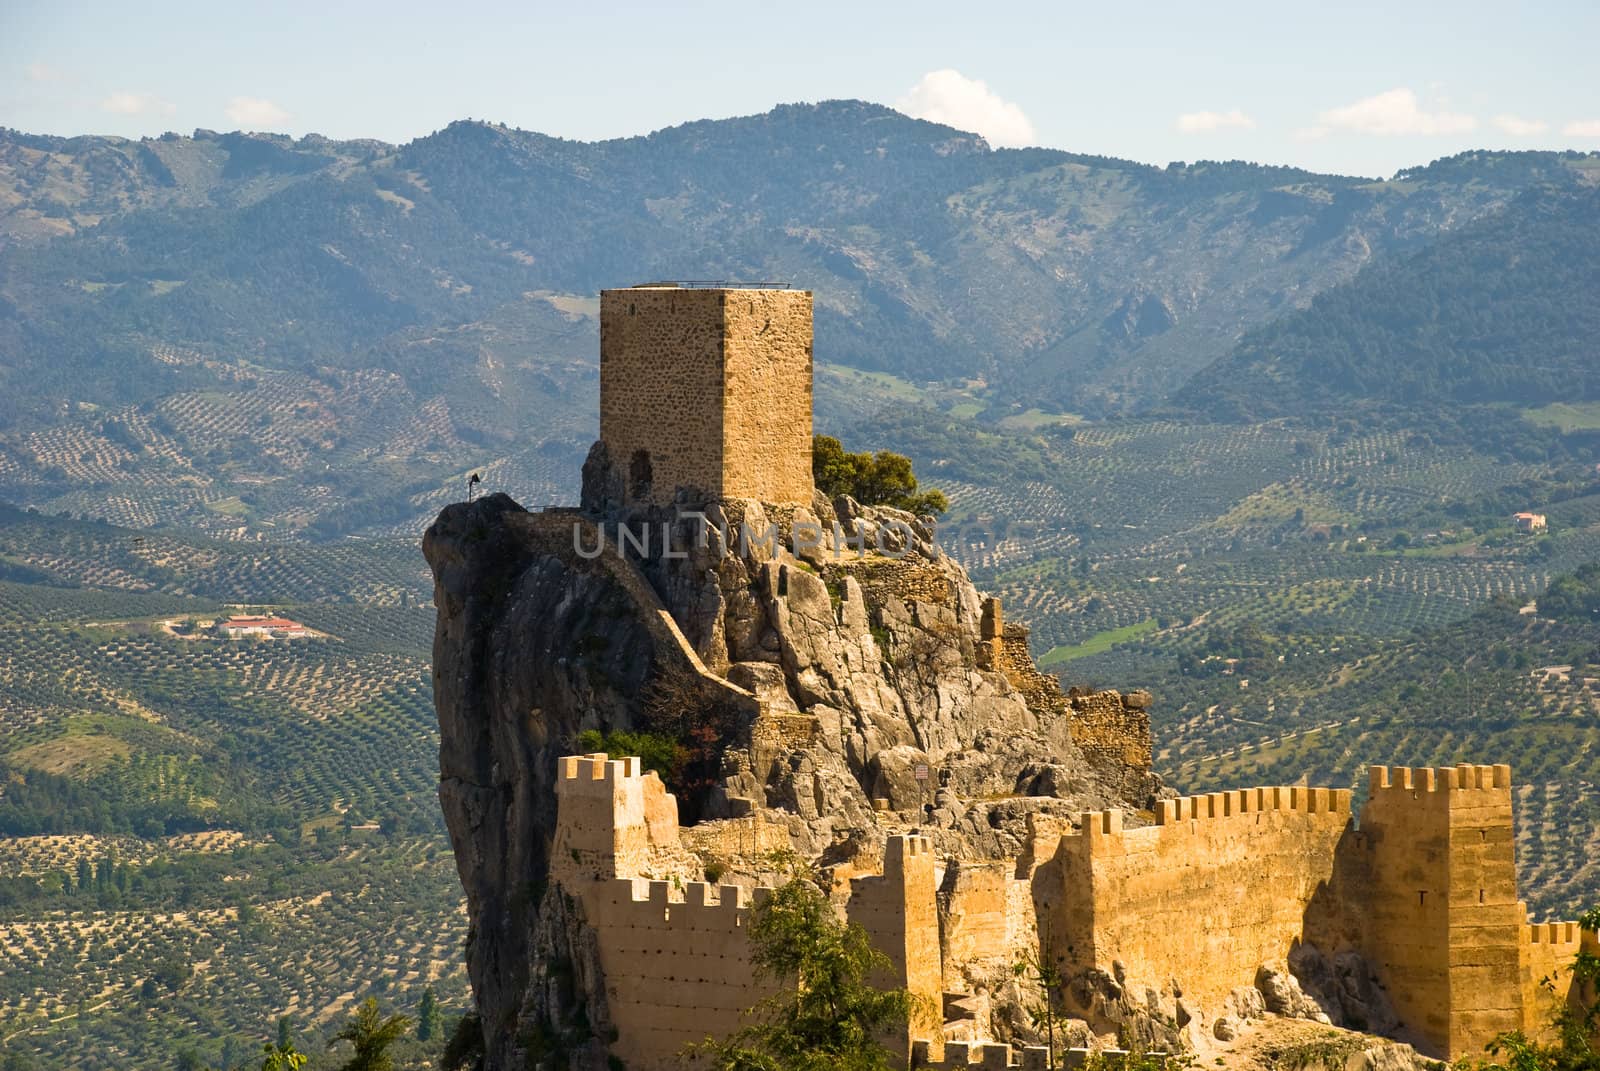 The castle of Cazorla in Andalusia, Spain against a landscape of olive trees